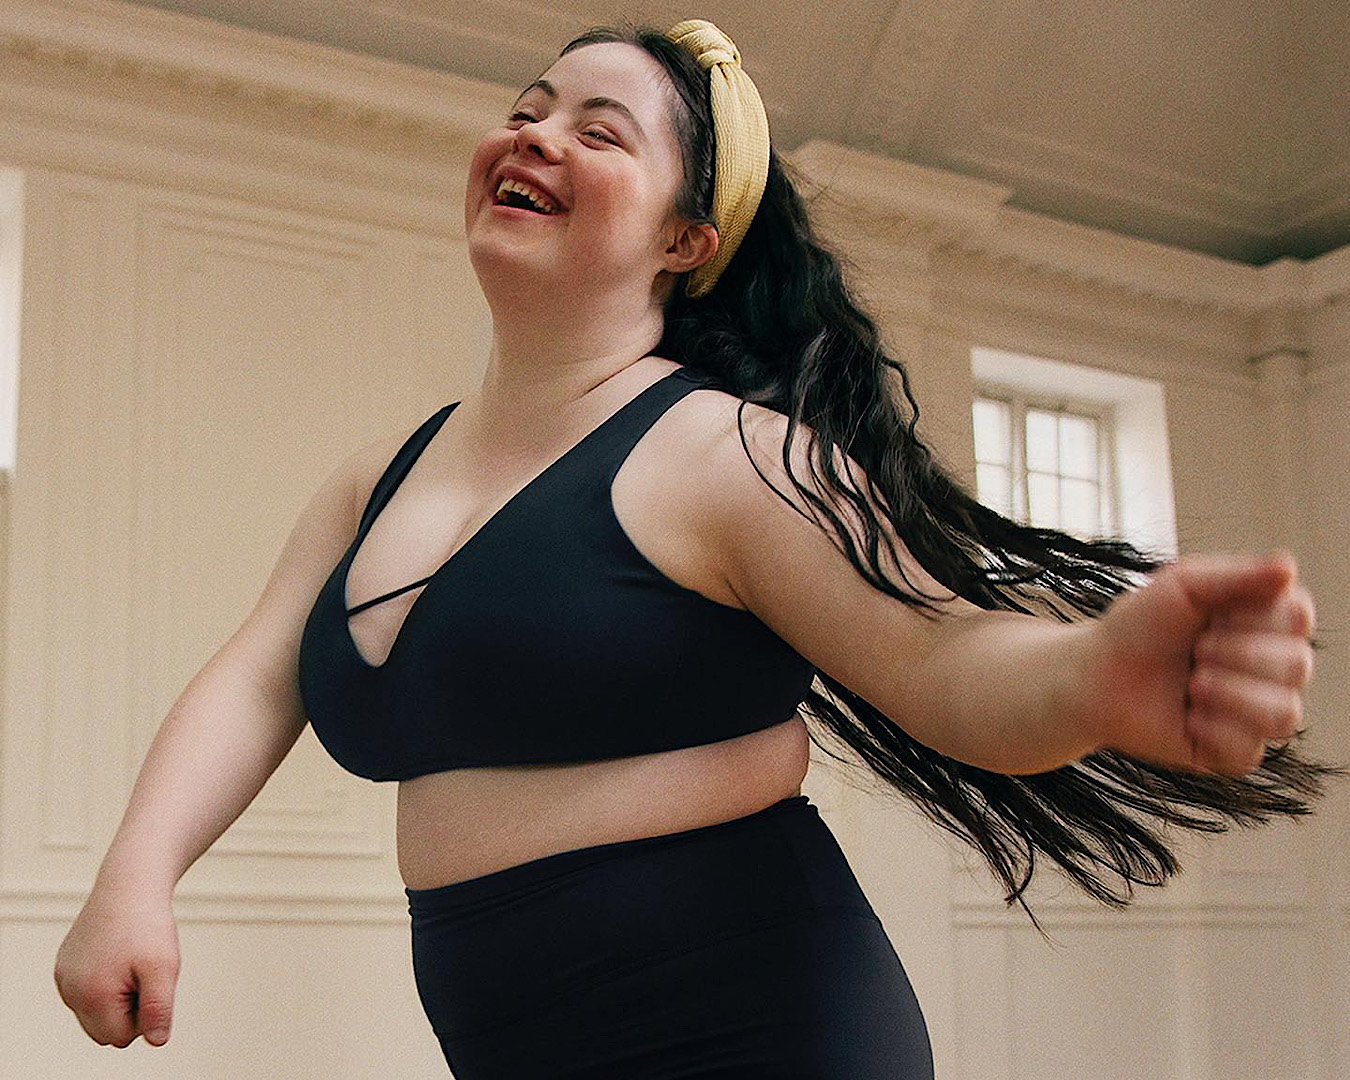 A woman wearing a matching set of black Adidas leggings and bra is loving life as she spins around the room. 